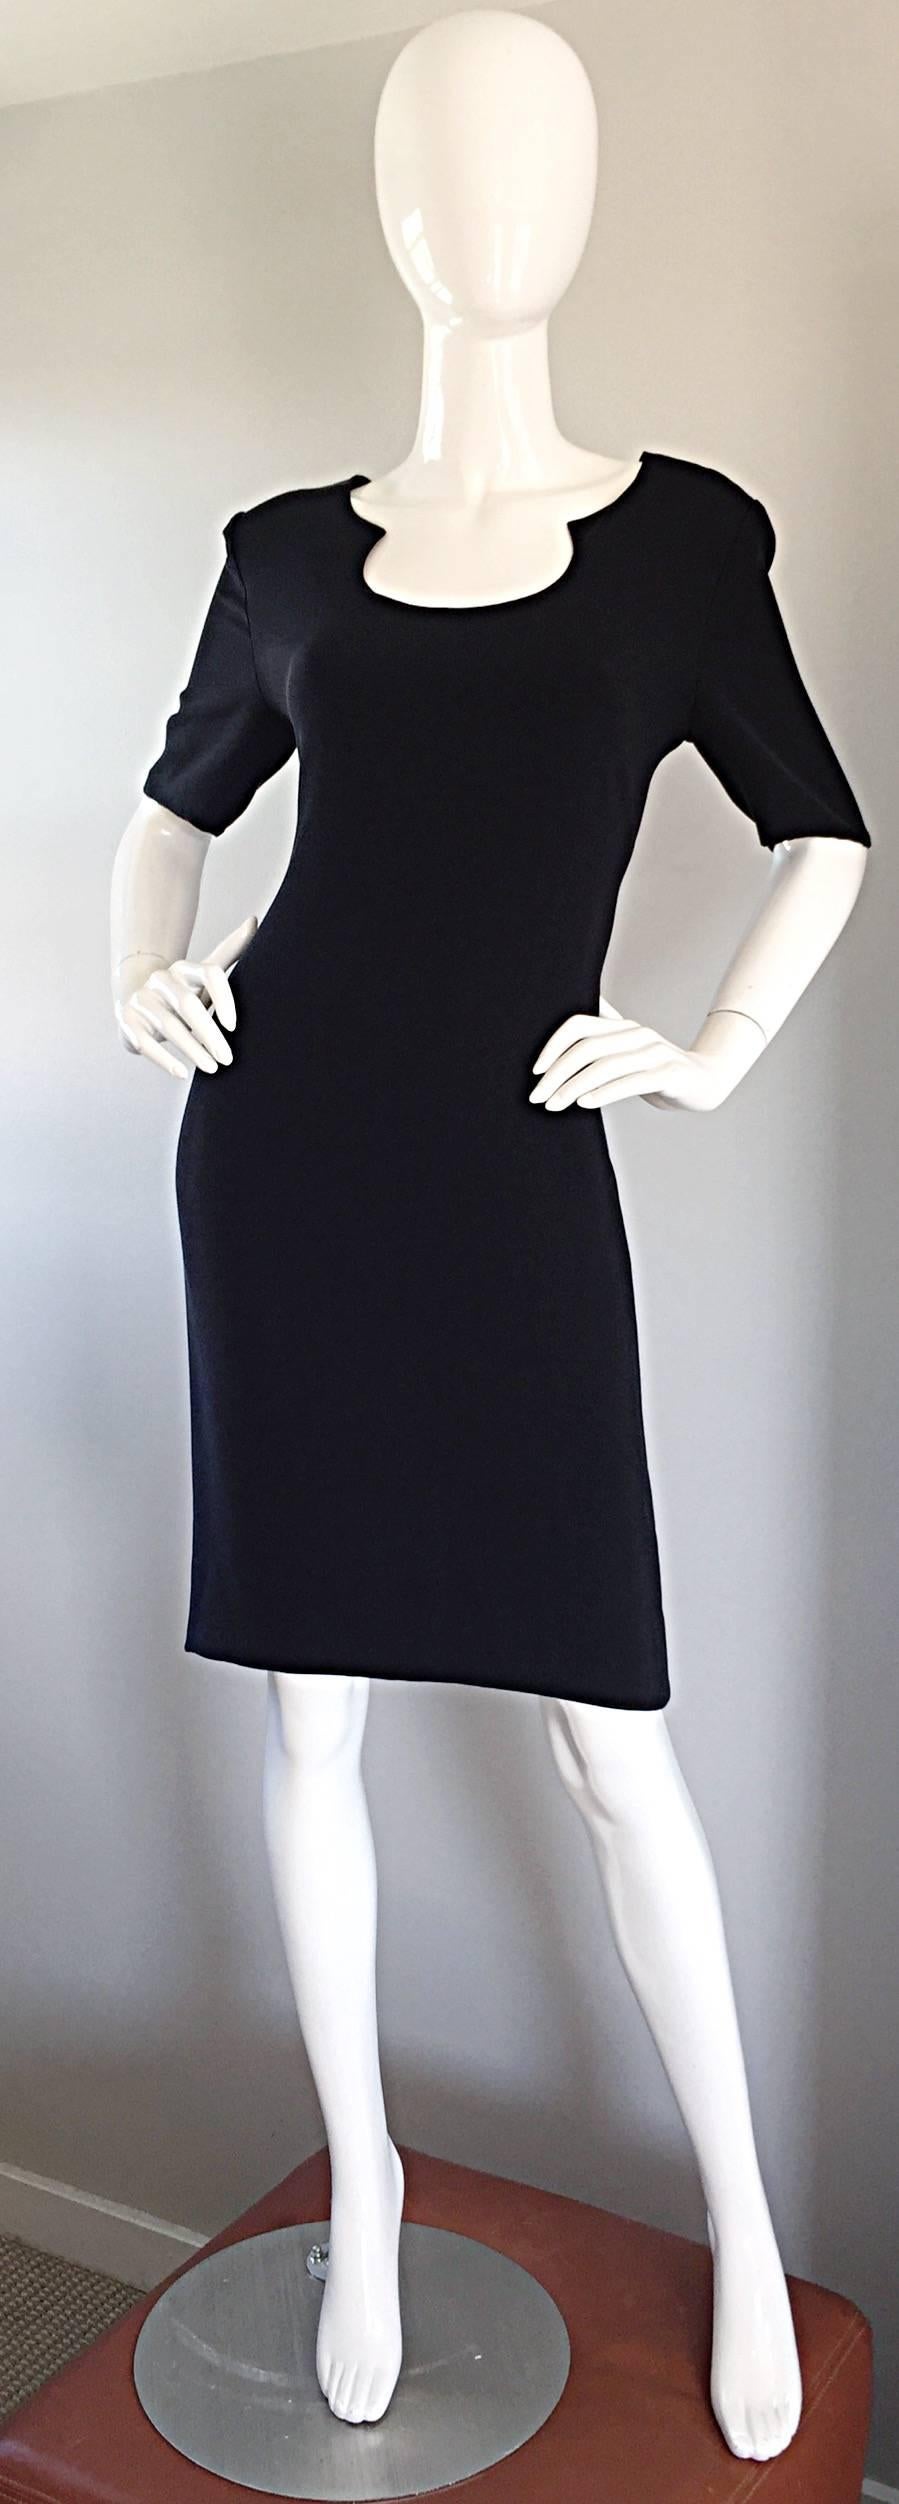 Perfect vintage 1990s 90s BILL BLASS little black dress! Double faced jersey, that hugs the body in all the right places...stretches to fit. Flattering neckline, with short half sleeves that hit just at the elbow. Hidden zipper up the back, with